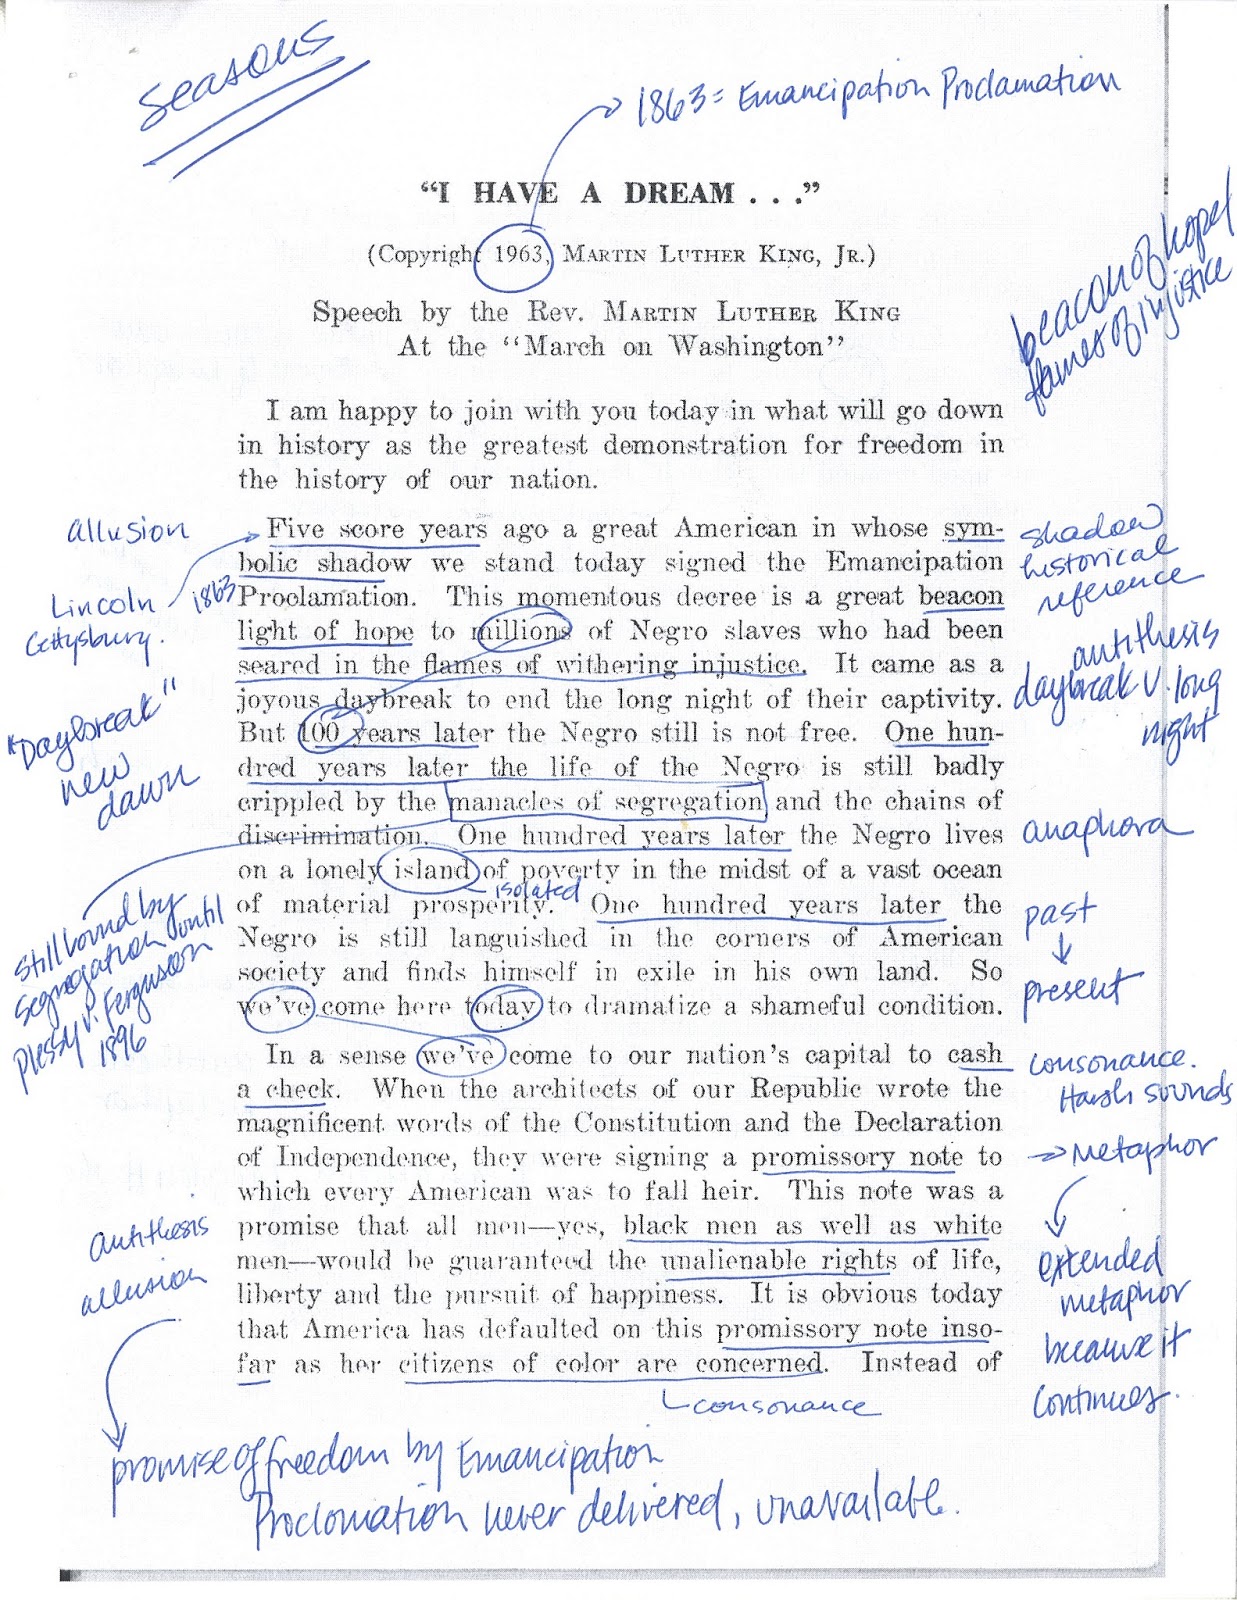 Essay about martin luther king martin luther king jr 